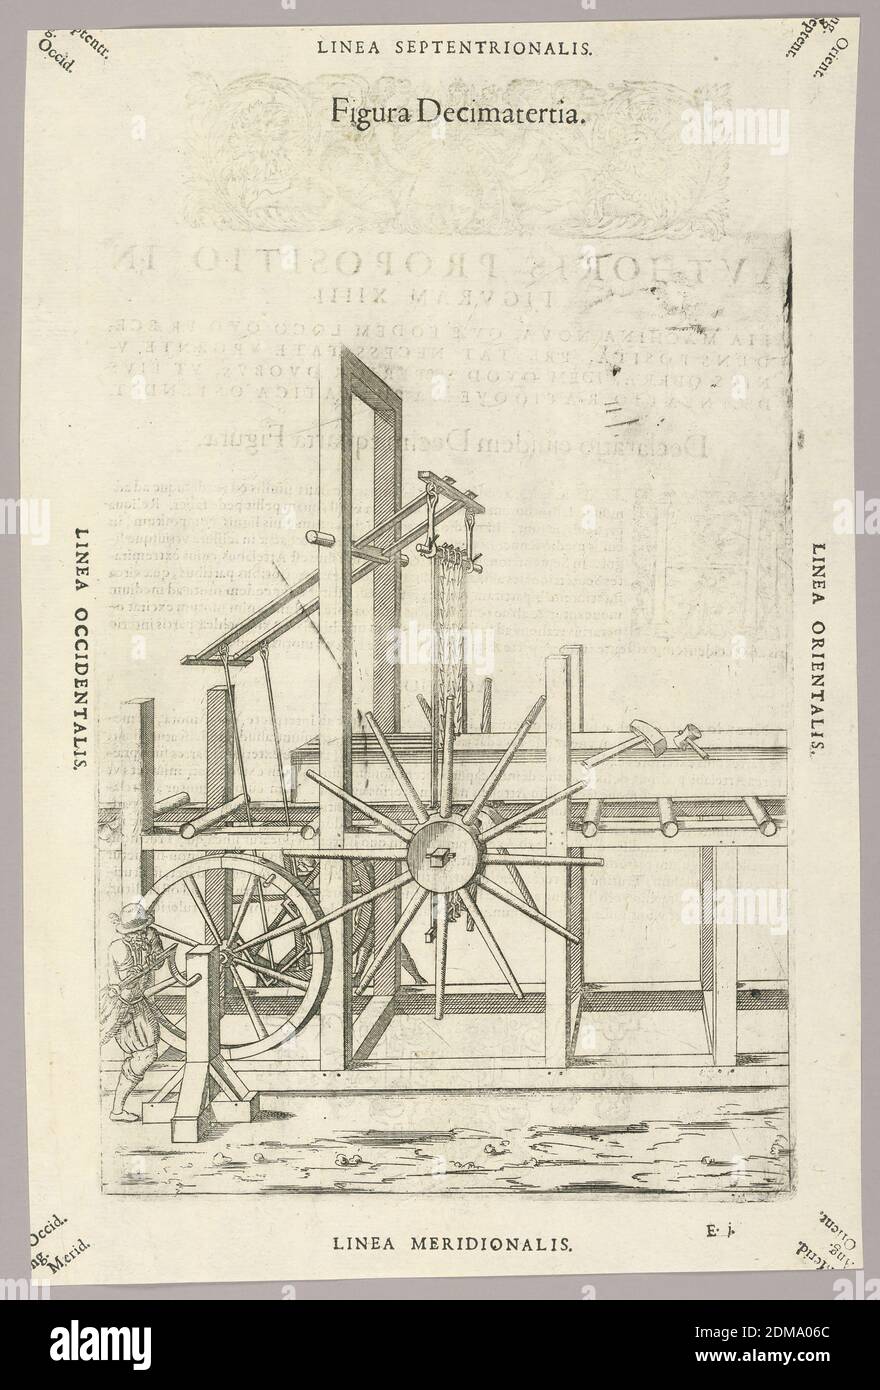 Plate XIII, from Theatrum instrumentorum et machinarum, Julio Paschale, Woodcut on paper, Wooden machine for slicing wood into planks or beams at which two men are turning wheels on an axel, rods connect it to an elevated treadle which moves toothed bands up and down through the wood. Spoked wheel, center, moves the wood up. Description in Latin on verso of 1949-152-210., Europe, 1582, Print Stock Photo